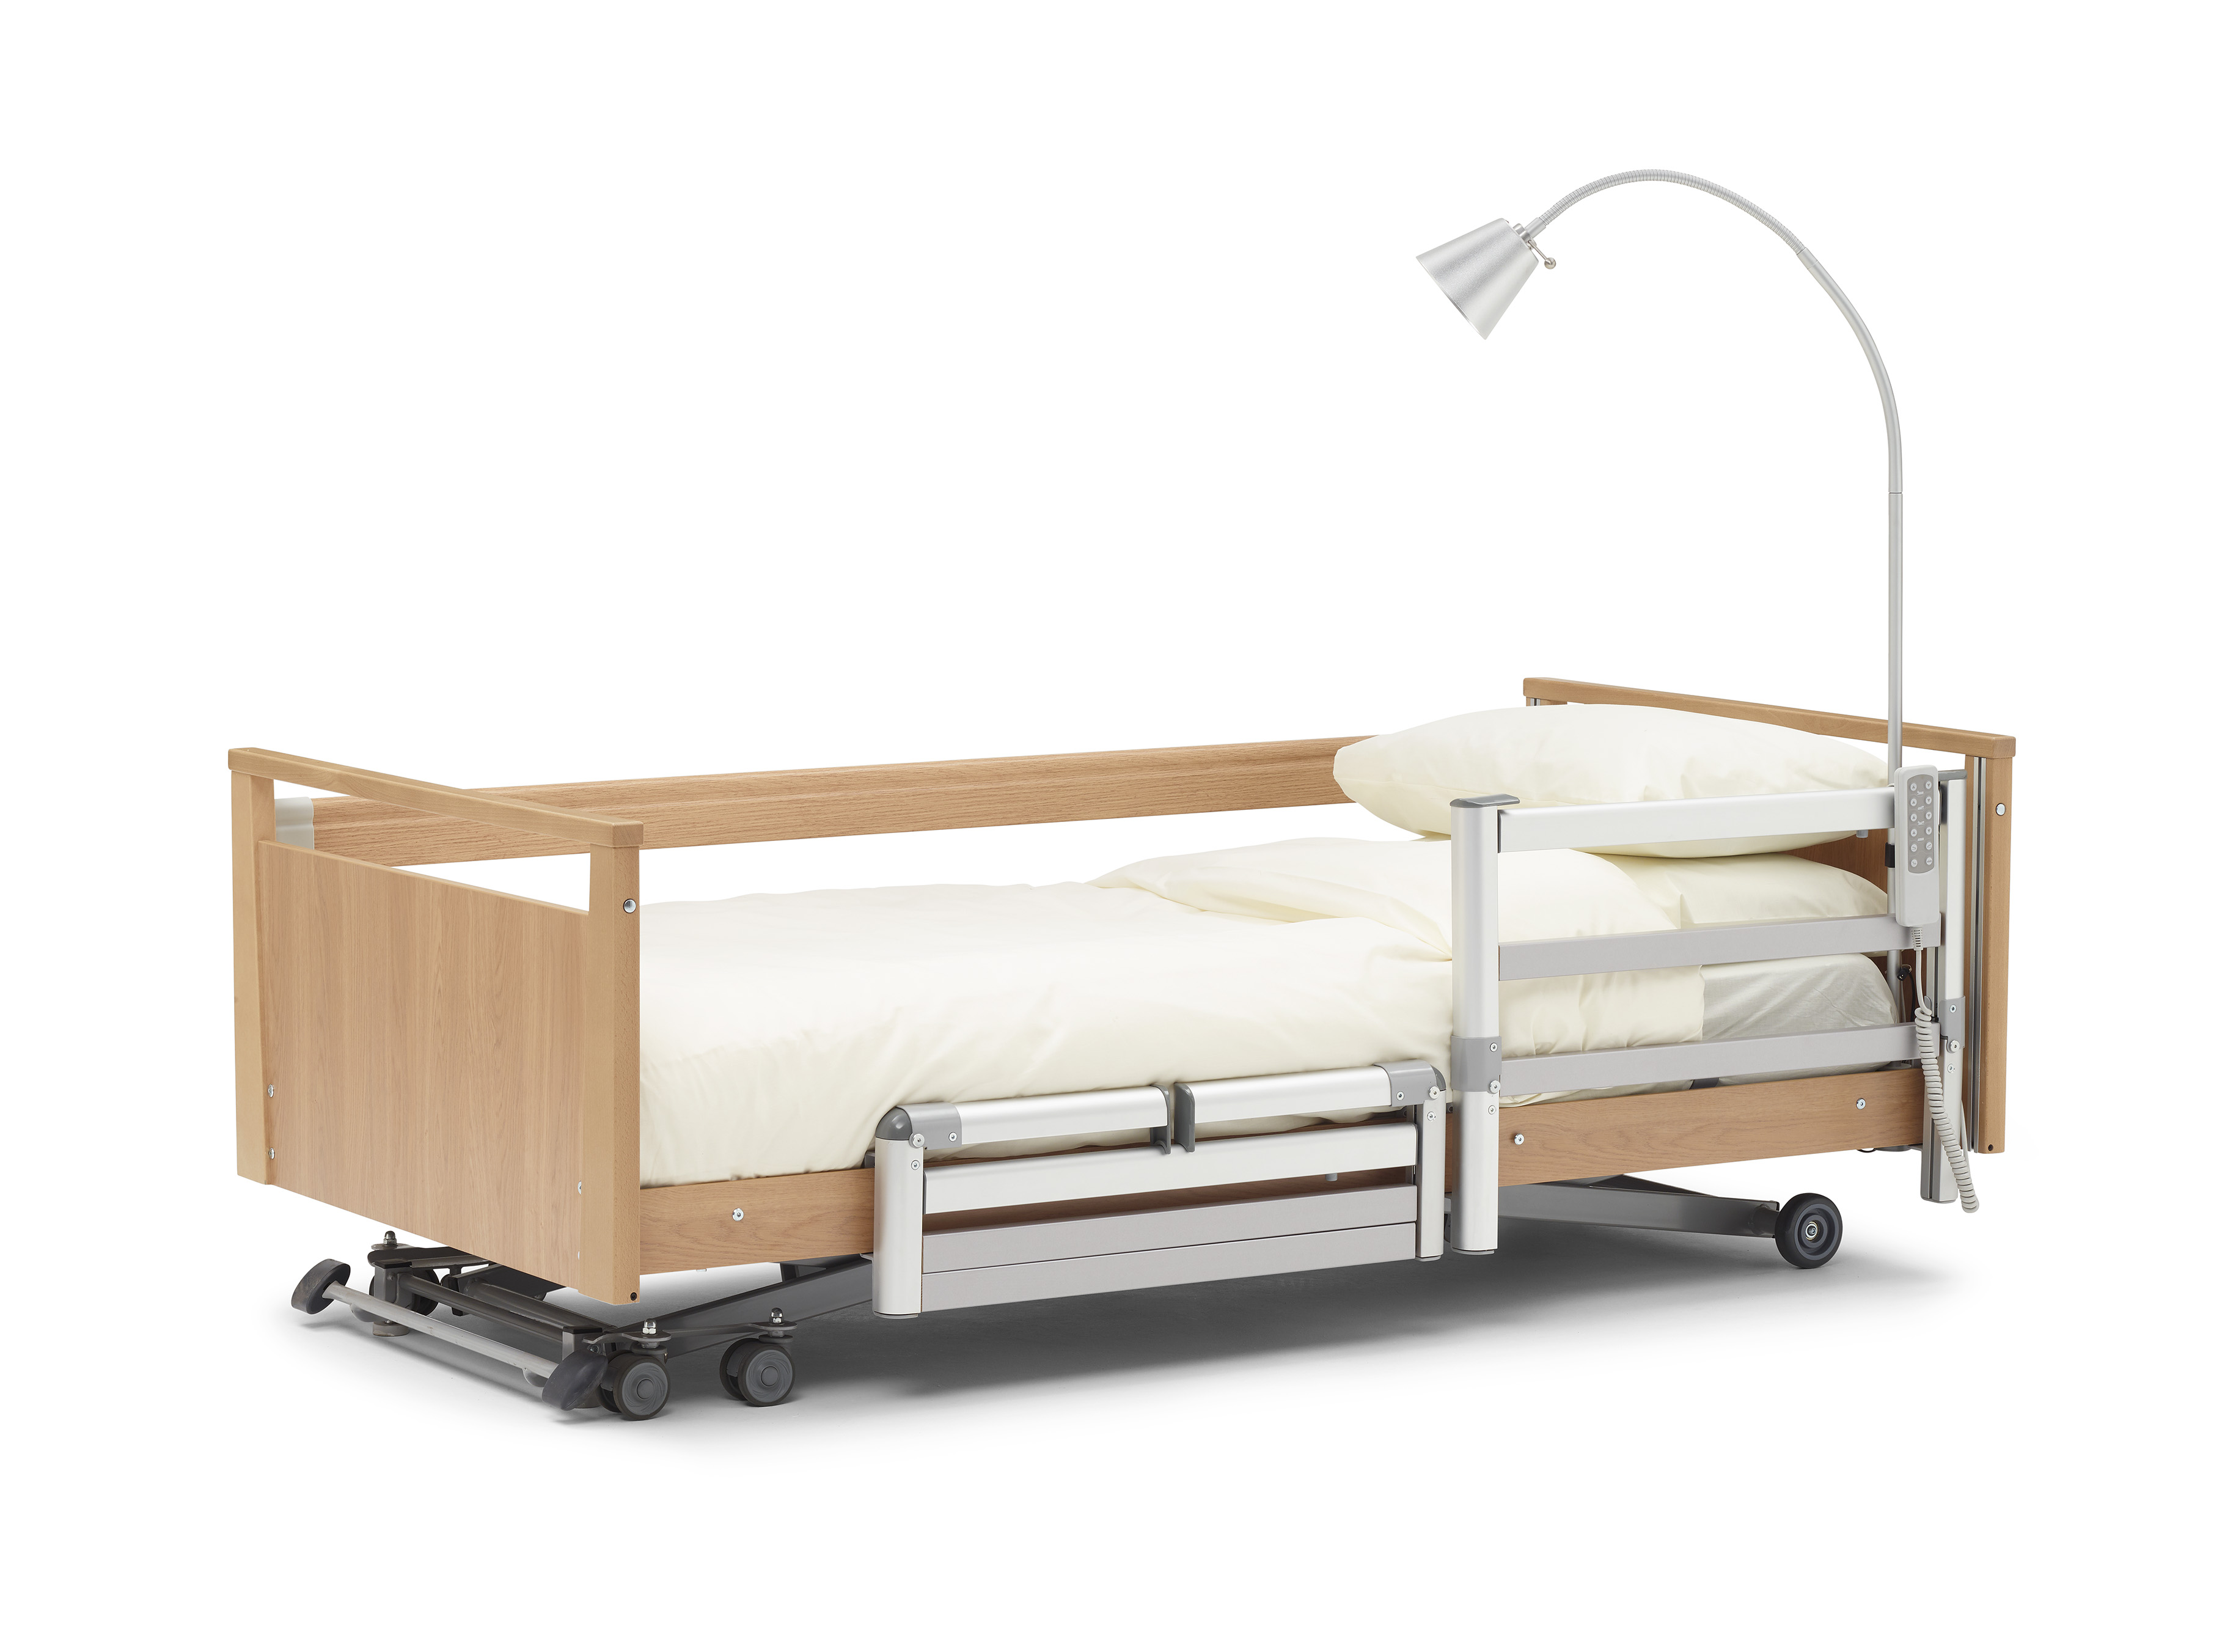 Impress 3 bed c/w Classic head/foot boards and side rails only
Finish: Light Sorano Oak